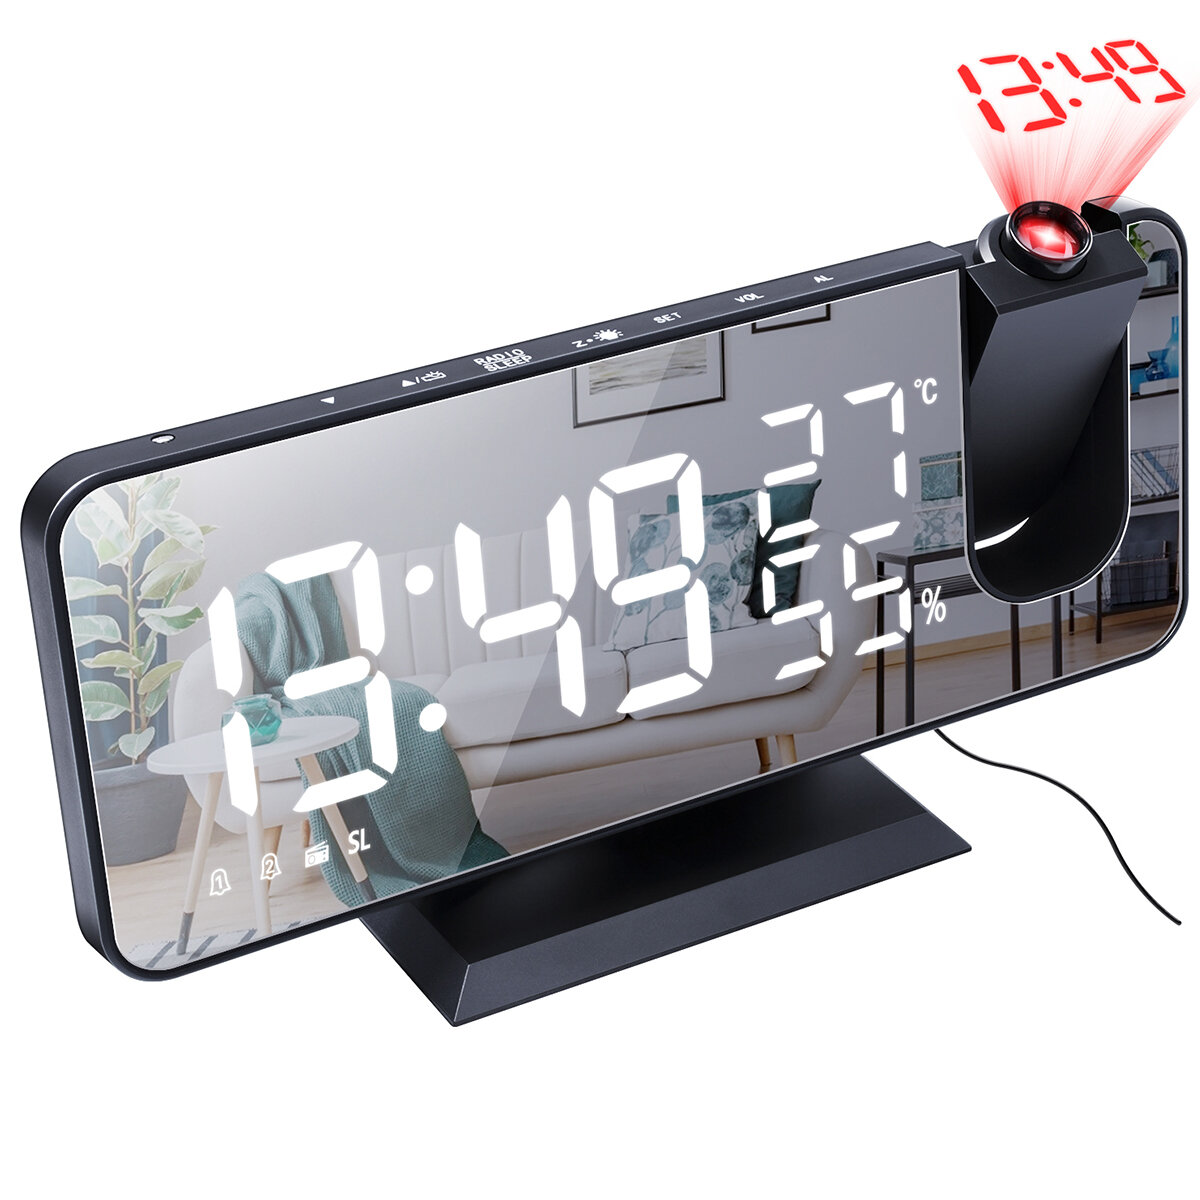 Bakeey LED Digital Alarm Clock FM Radio HD Time Projection Mirror Clocks Snooze Function Temperature Humidity Display Electronic Clock Time Clock